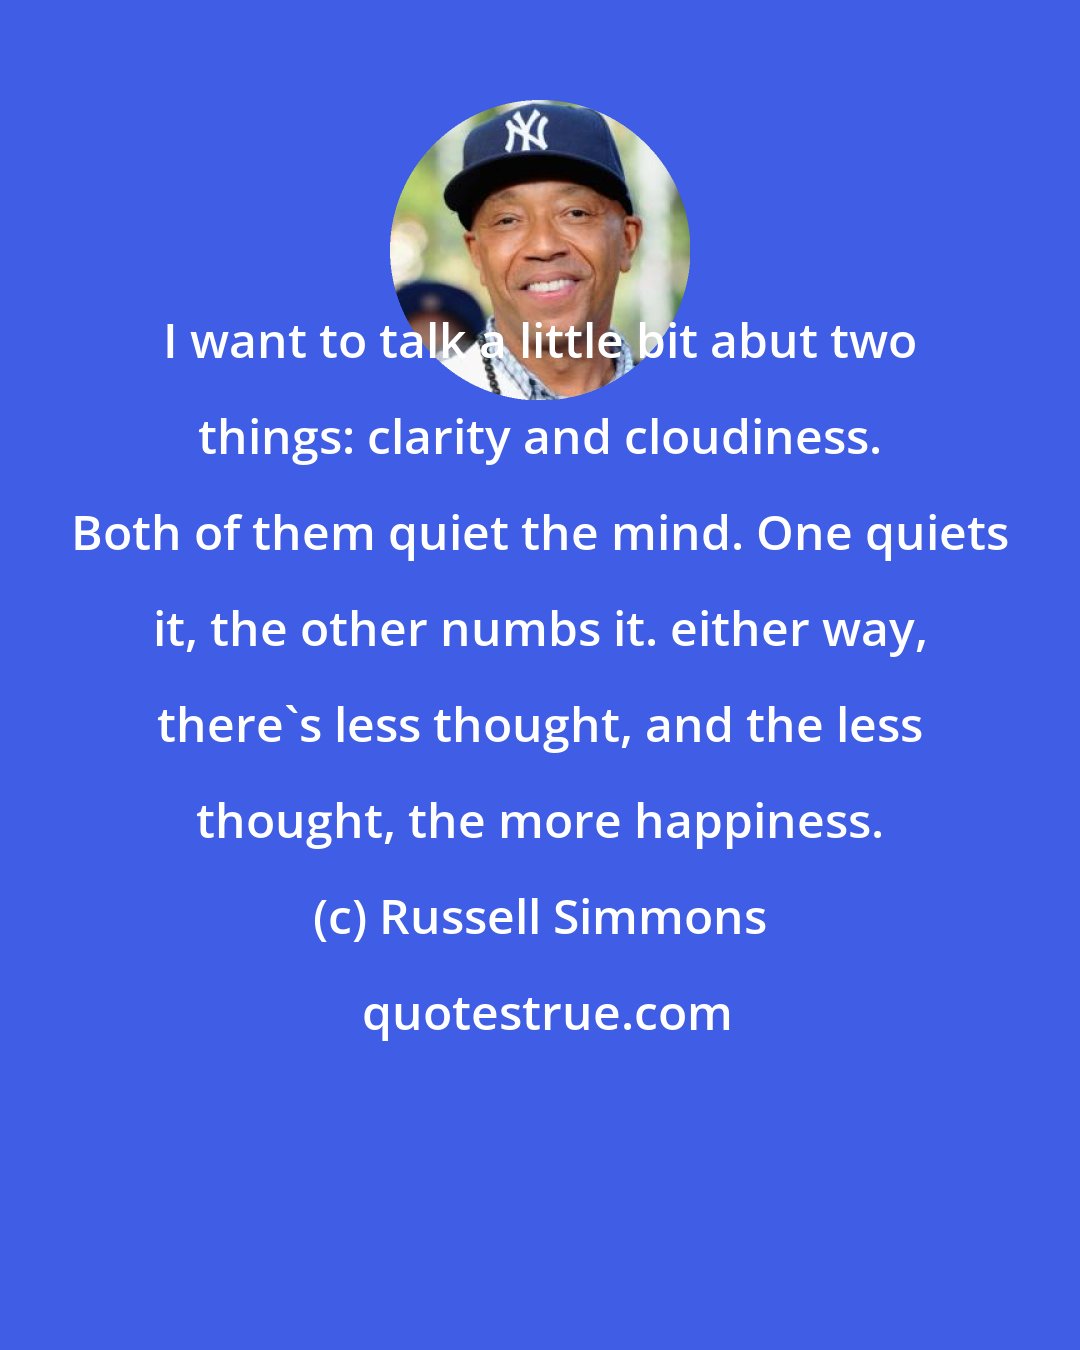 Russell Simmons: I want to talk a little bit abut two things: clarity and cloudiness. Both of them quiet the mind. One quiets it, the other numbs it. either way, there's less thought, and the less thought, the more happiness.